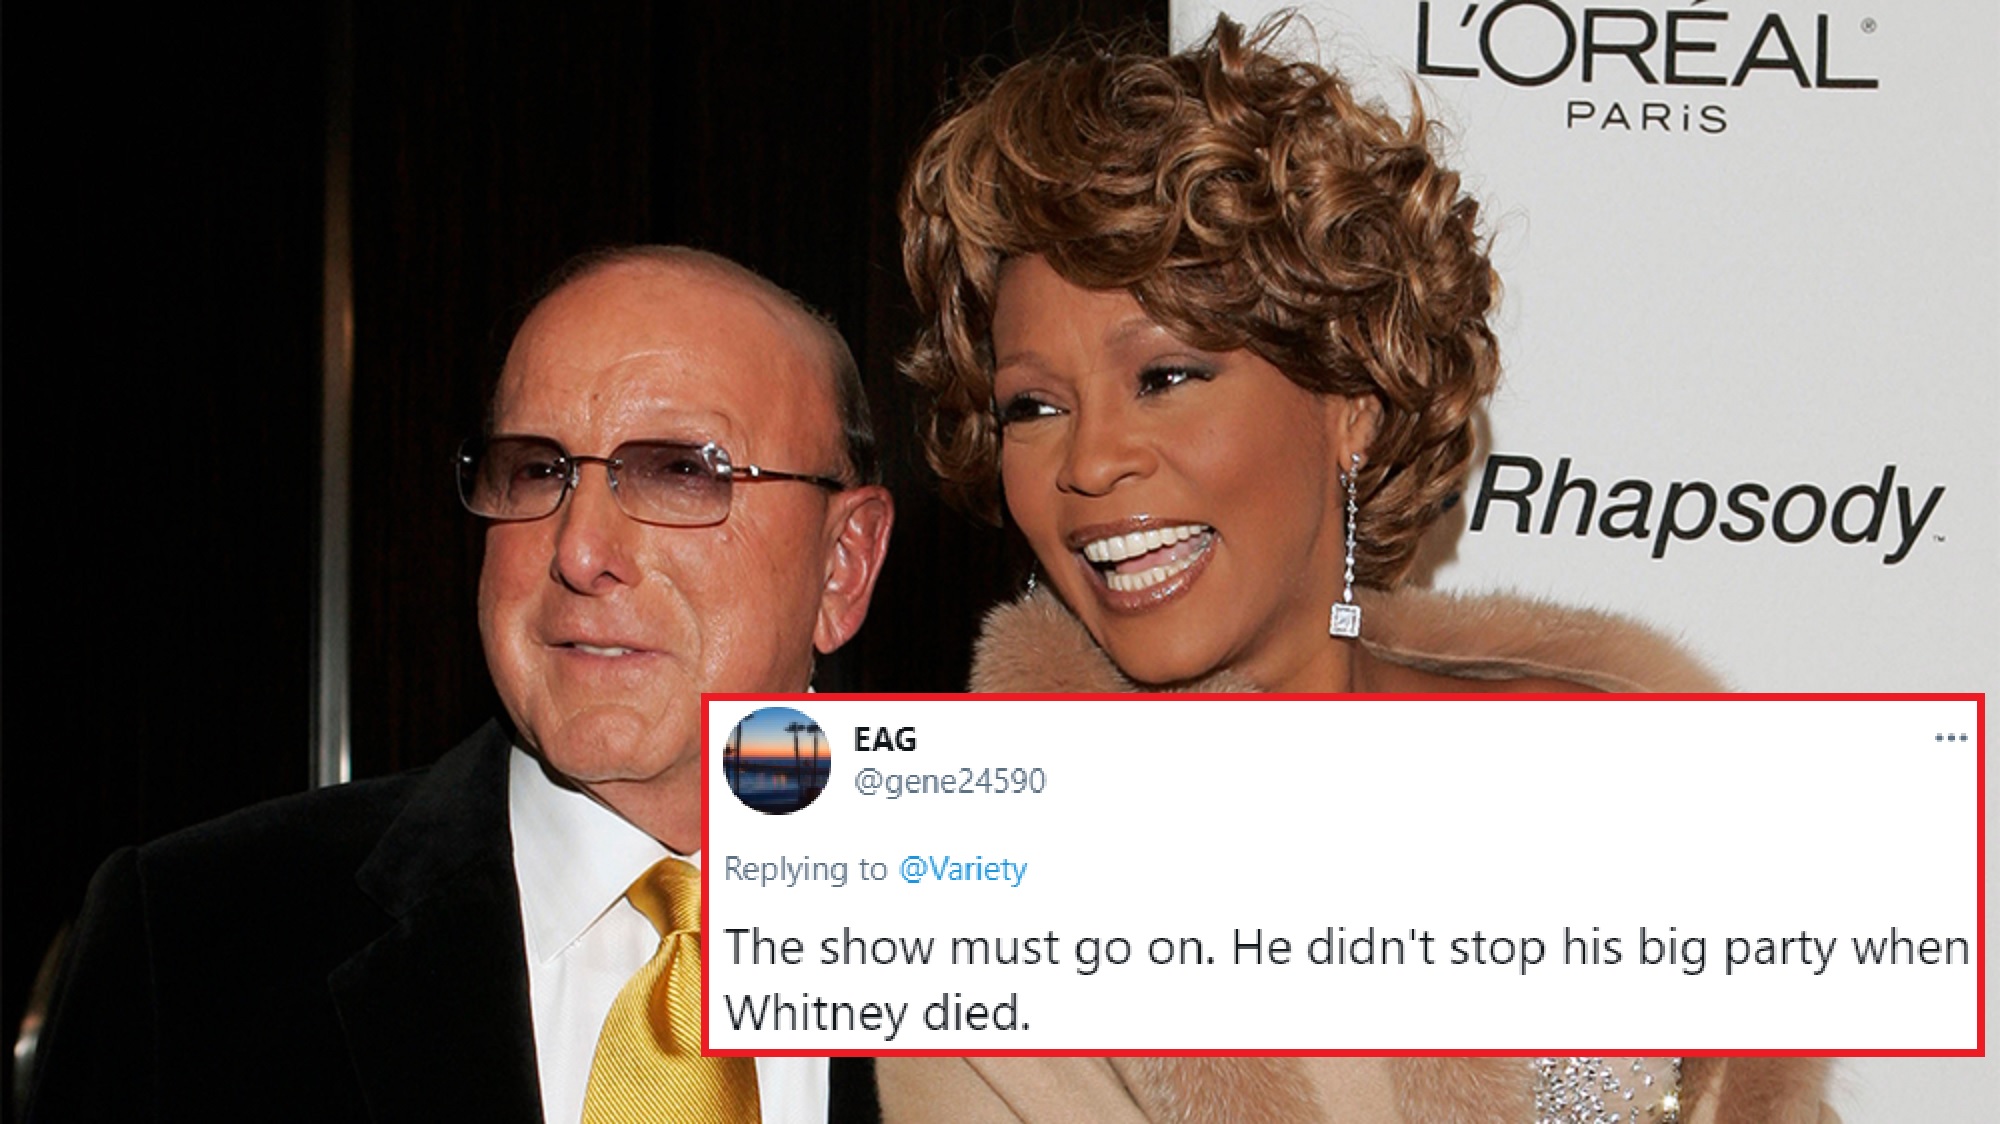 Clive Davis Postpones Pre-Grammy Party After Bell’s Palsy Diagnosis, People Wonder Why He Didn’t Do It When Whitney Houston Died